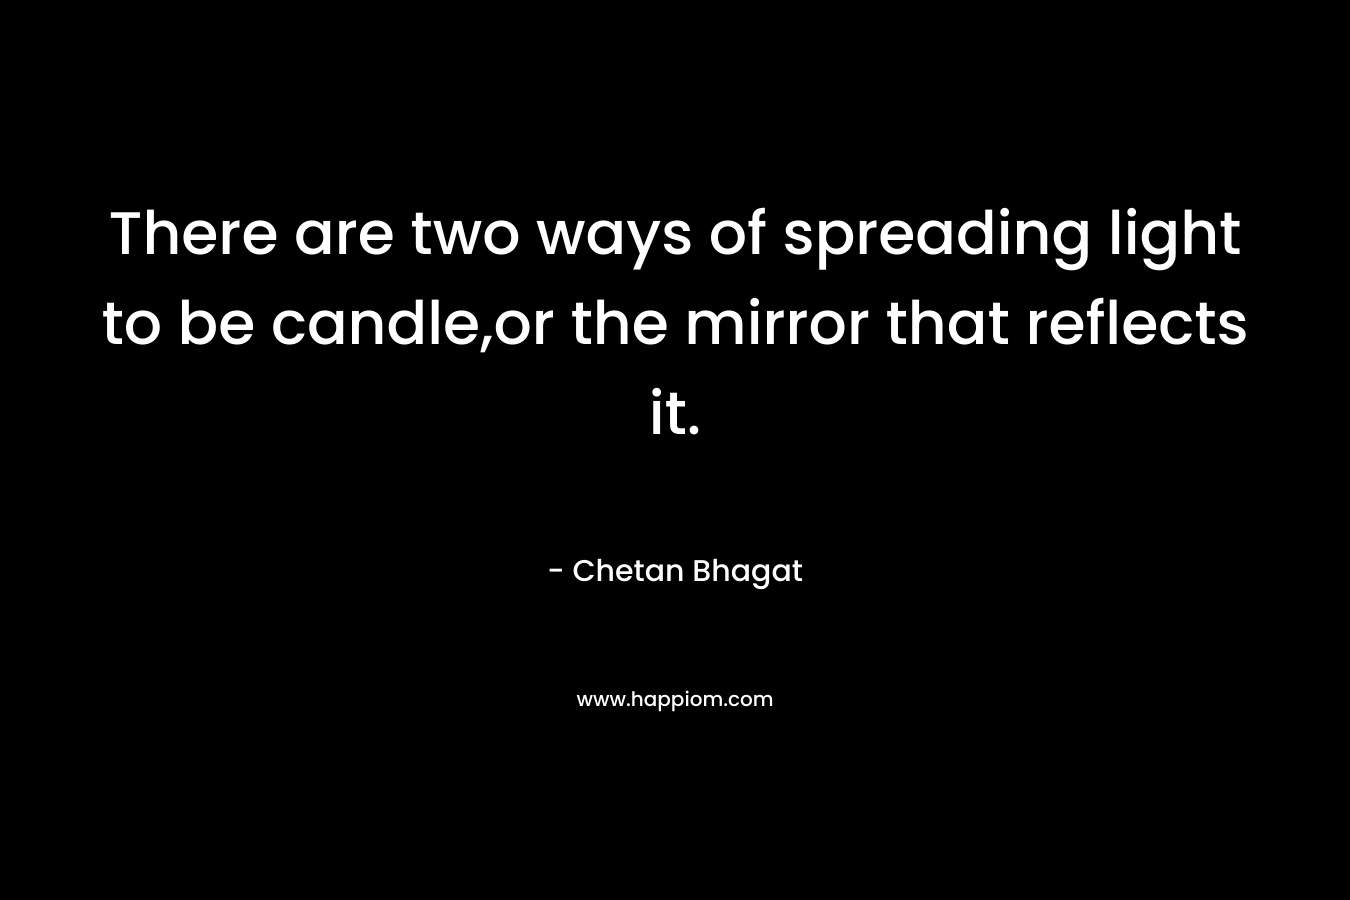 There are two ways of spreading light to be candle,or the mirror that reflects it. – Chetan Bhagat